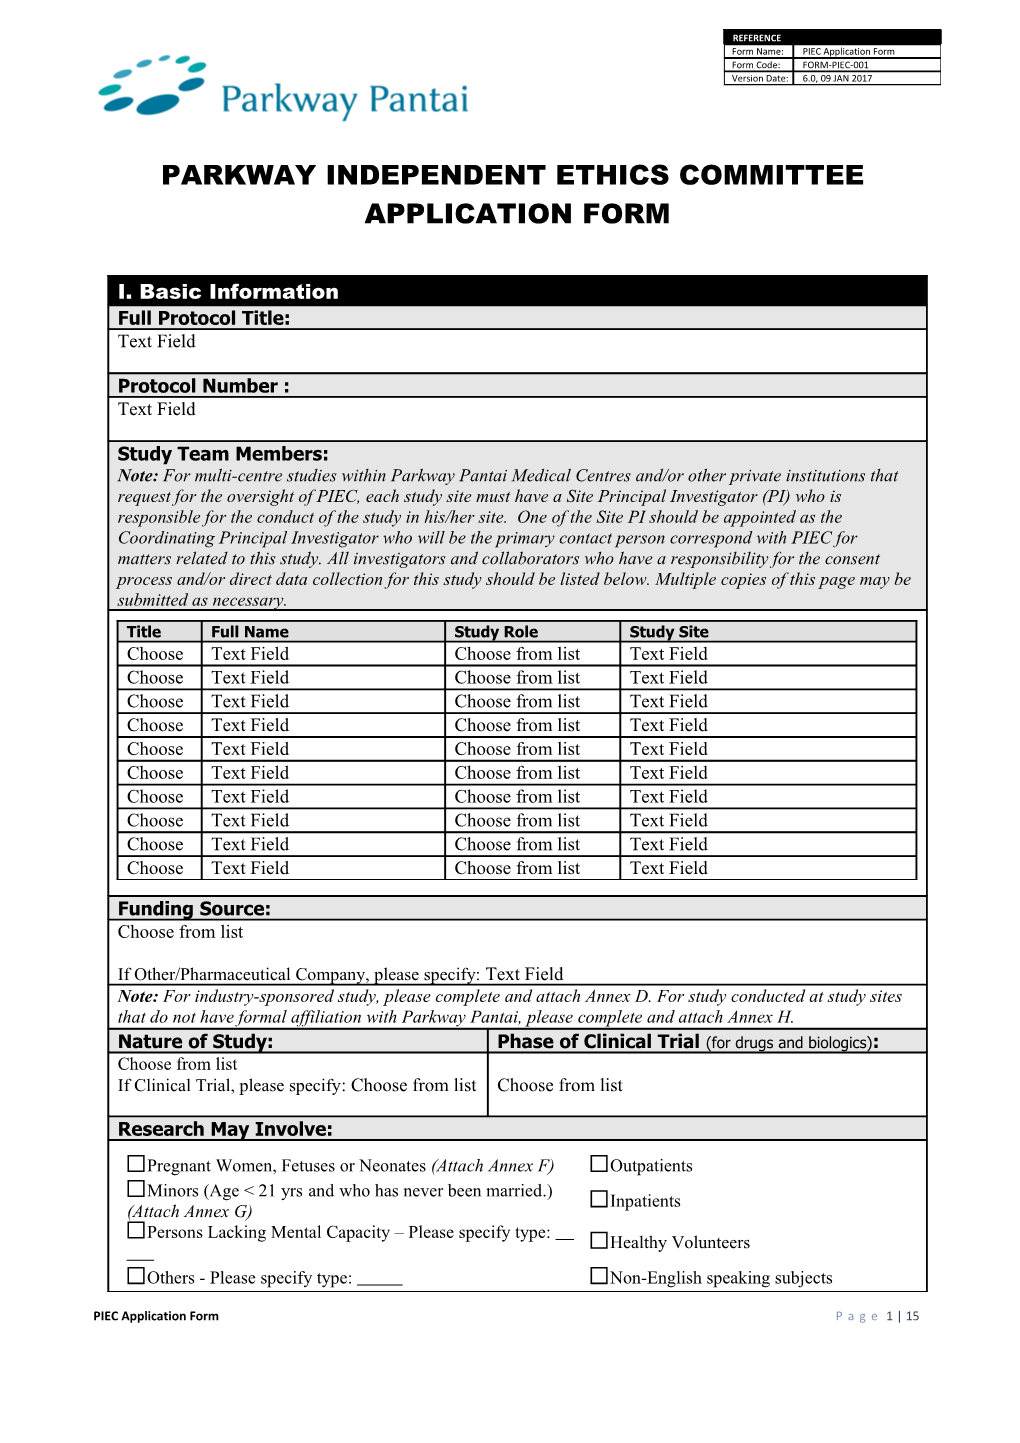 TTSH Research Ethics Committee Review Application Form